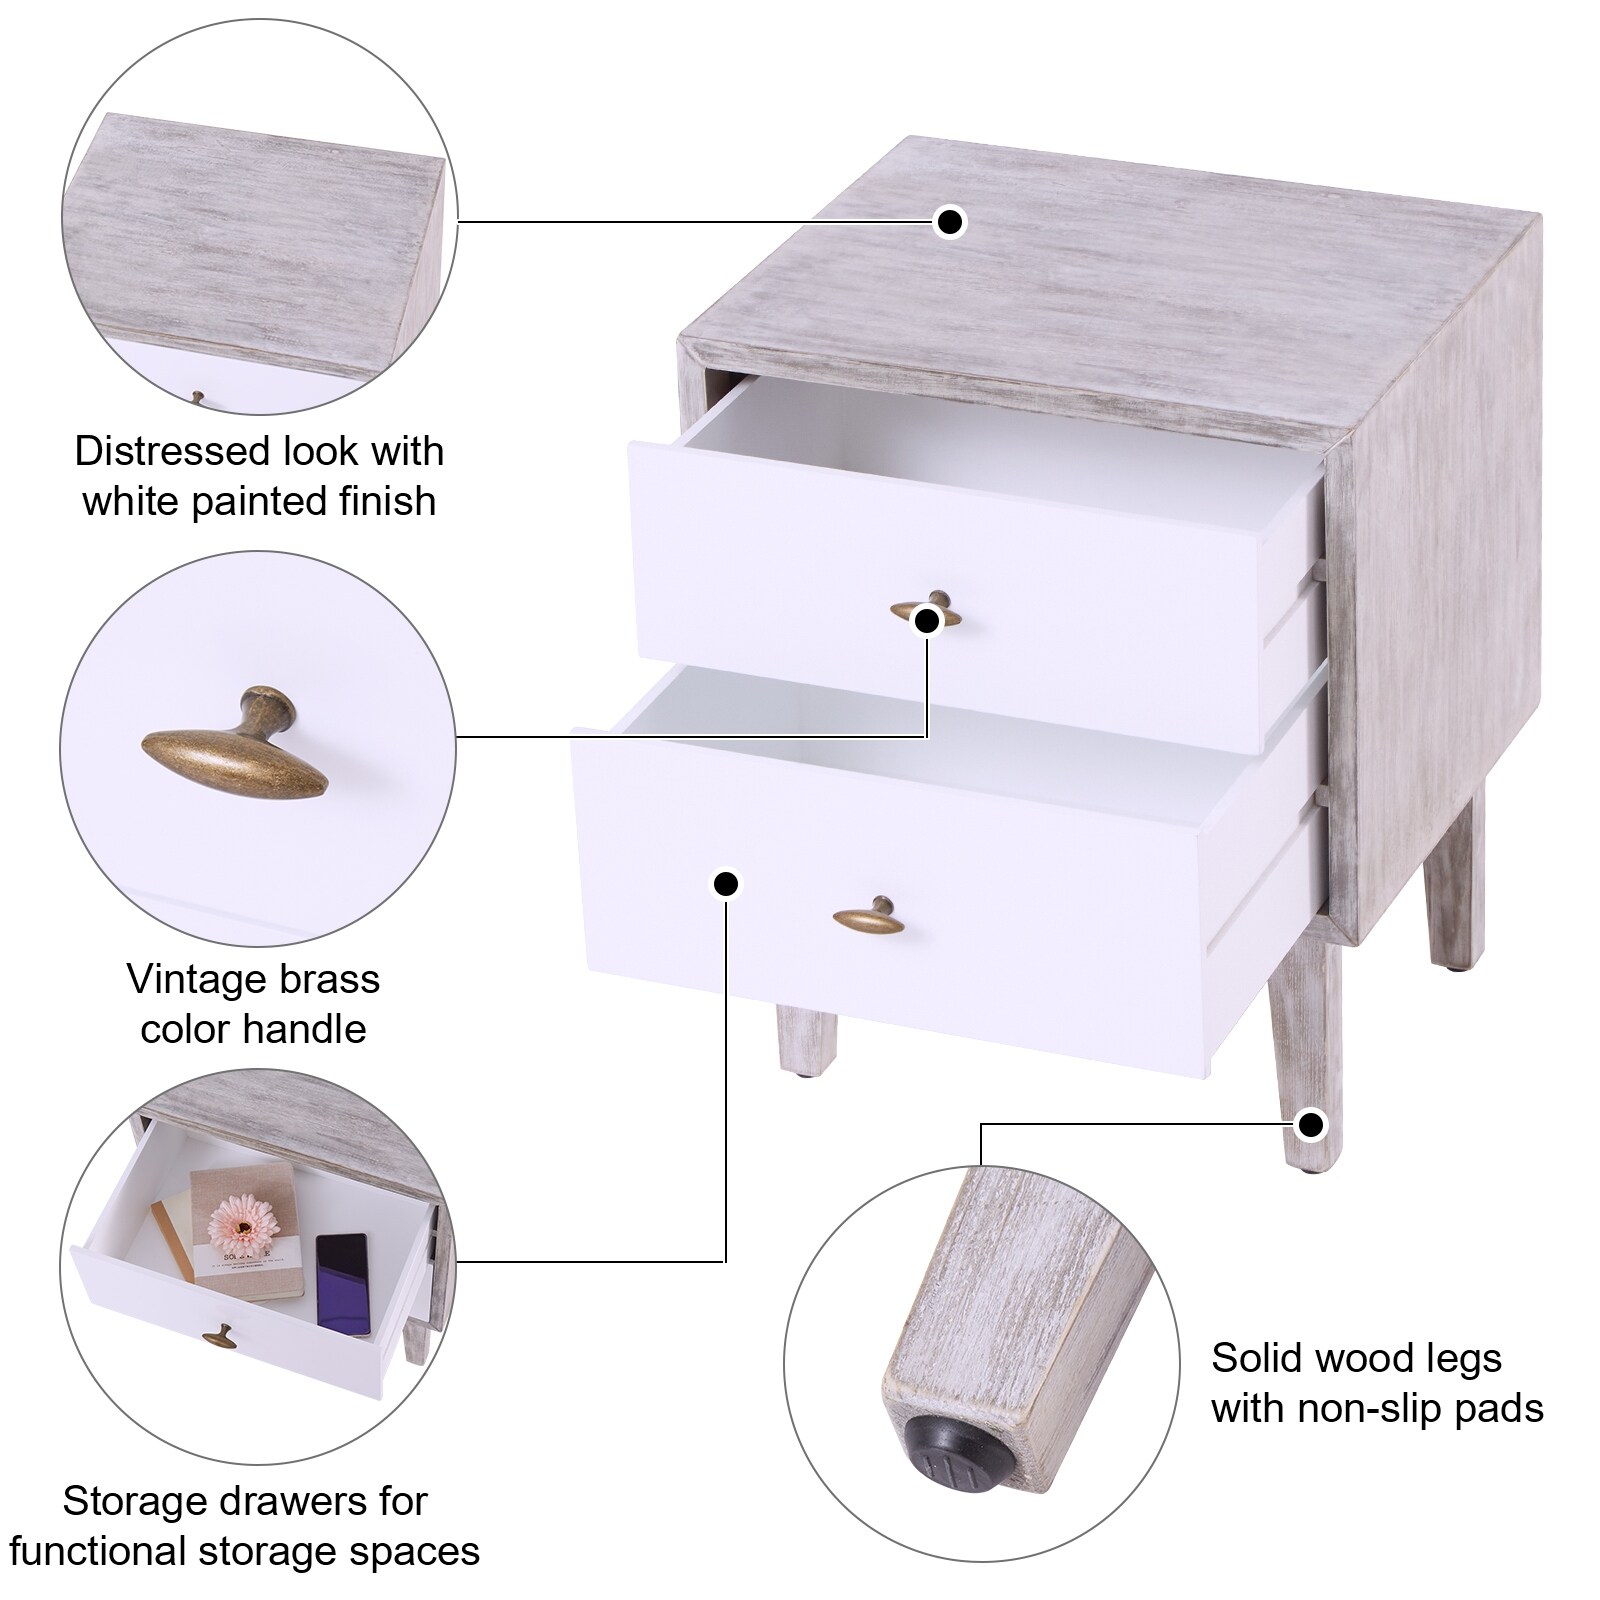 Kinbor Set of 2 Nightstands Bedside Tables with Drawers Modern Nightstand Accent Furniture for Bedroom Living Room White, Size: Medium